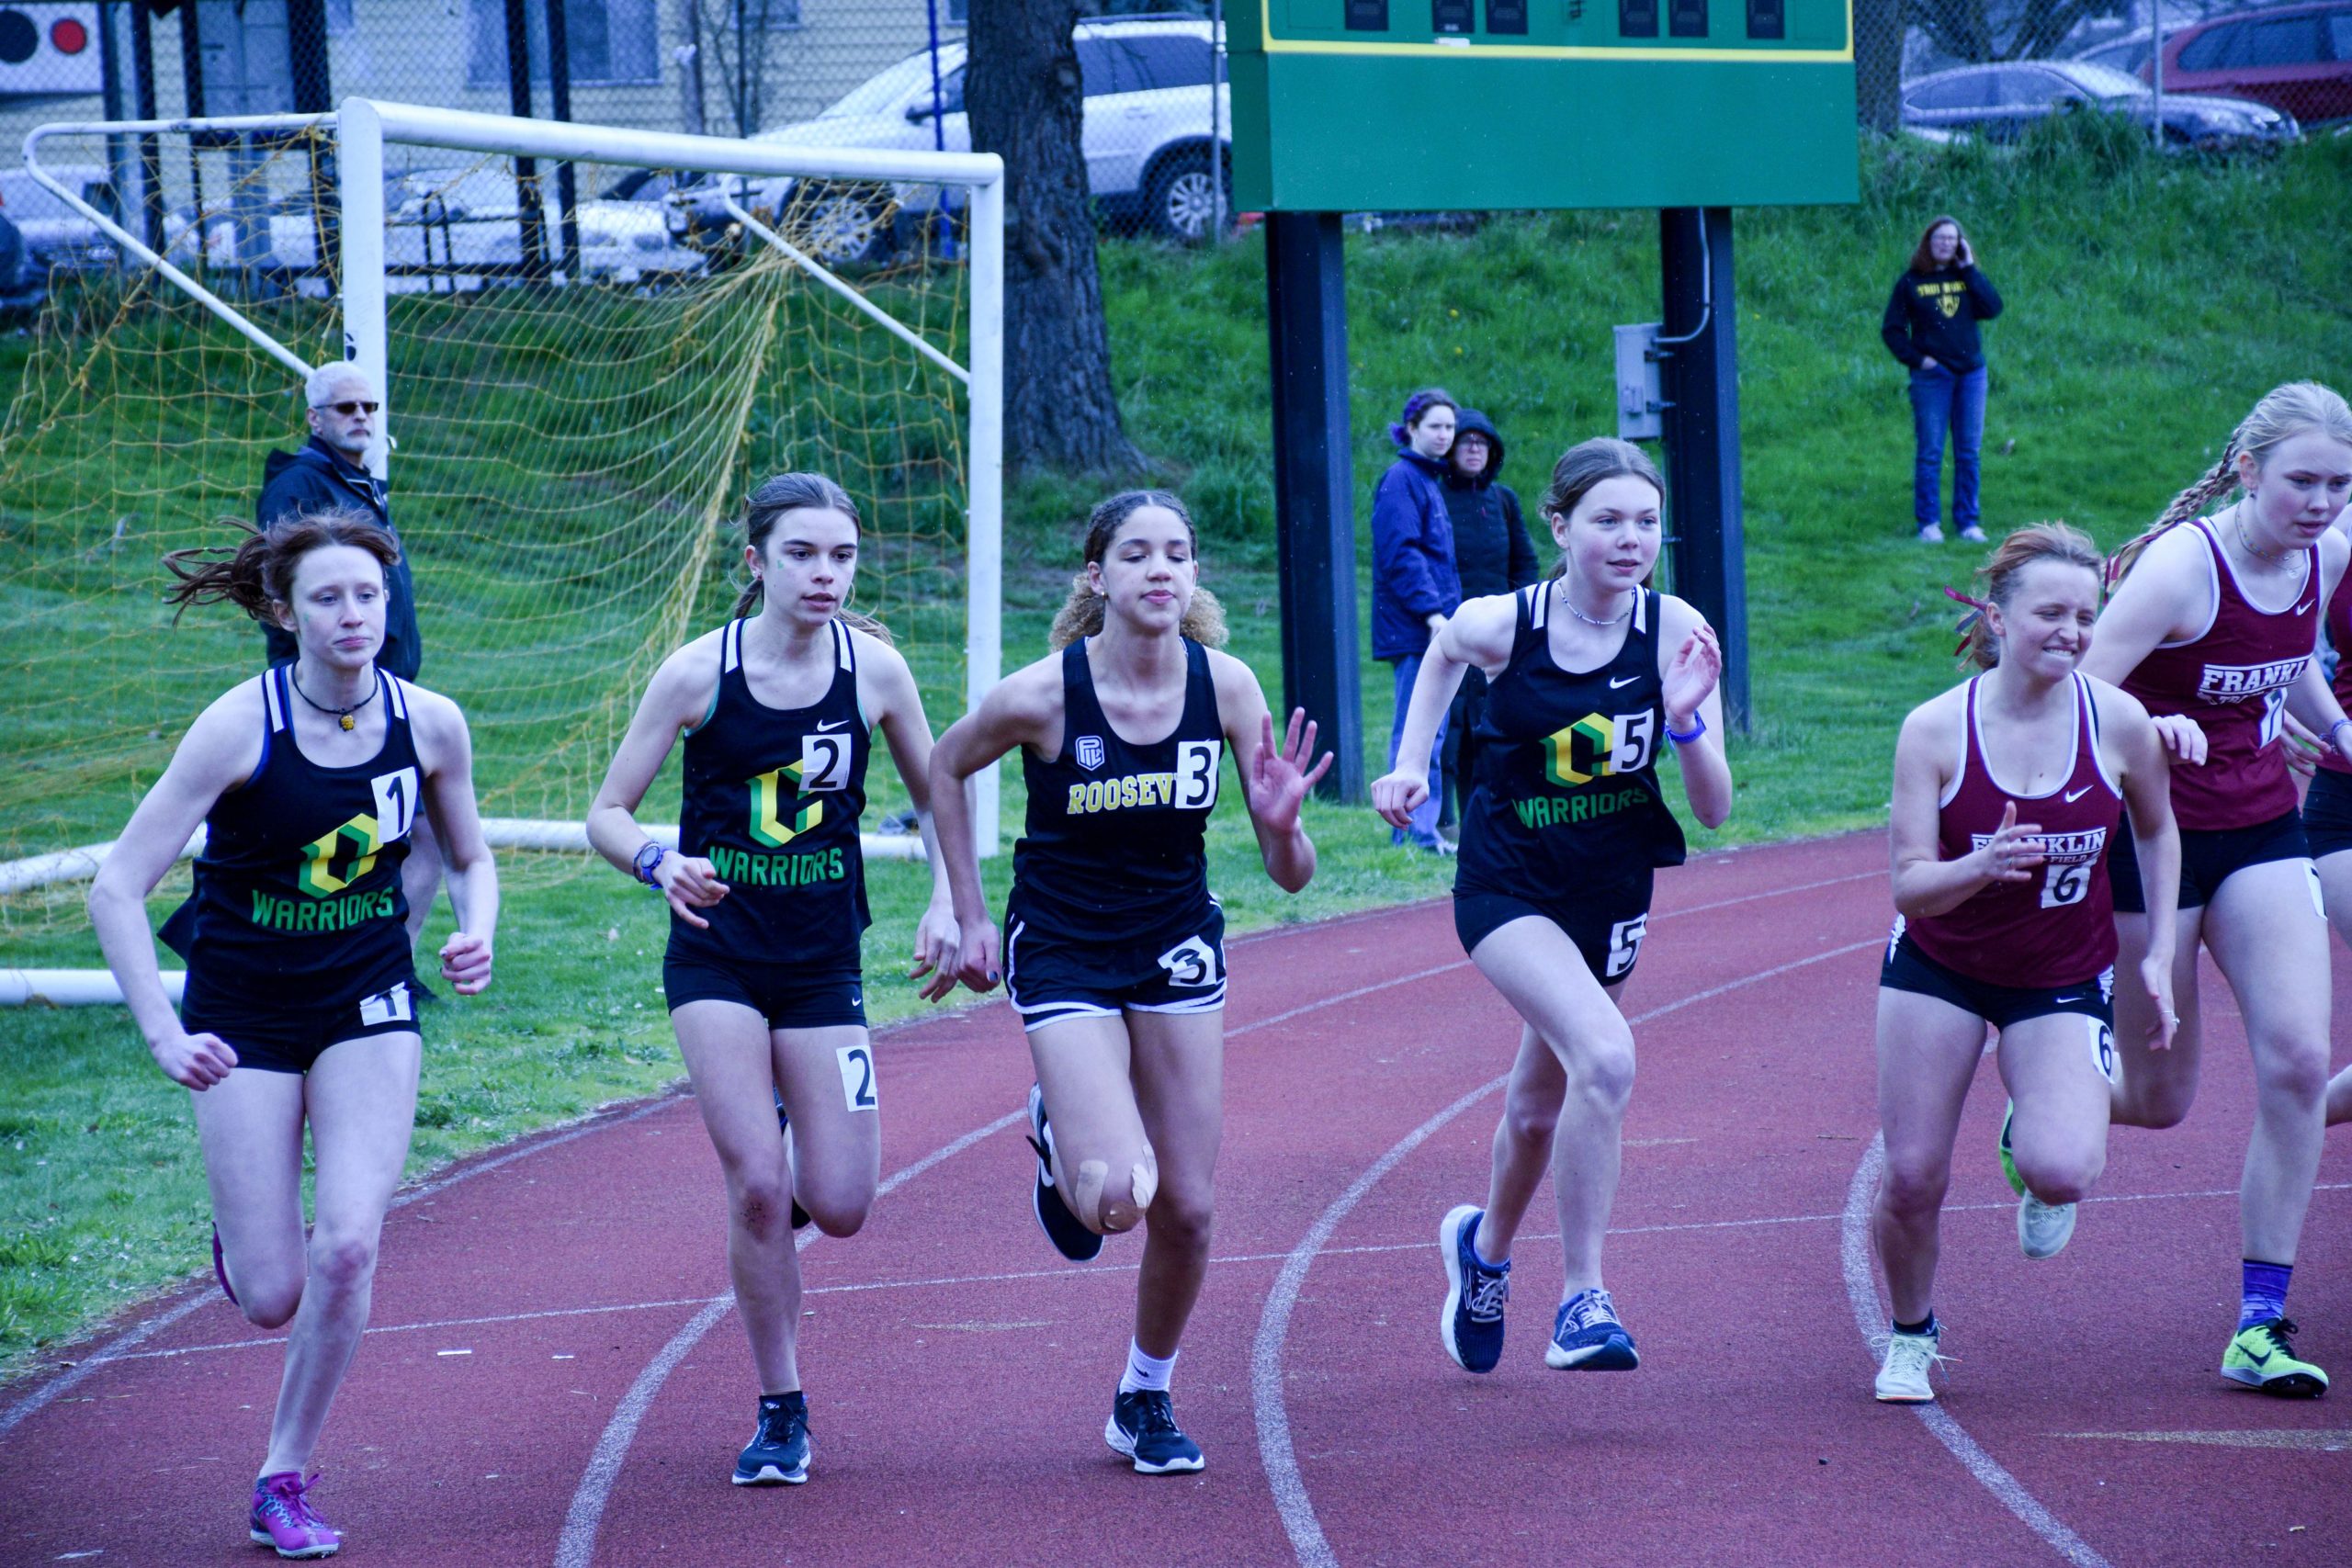 Iris Stasiuk, Cora Frick, and Anna Rogoway represent Cleveland in the 1500 meter race on April 5.